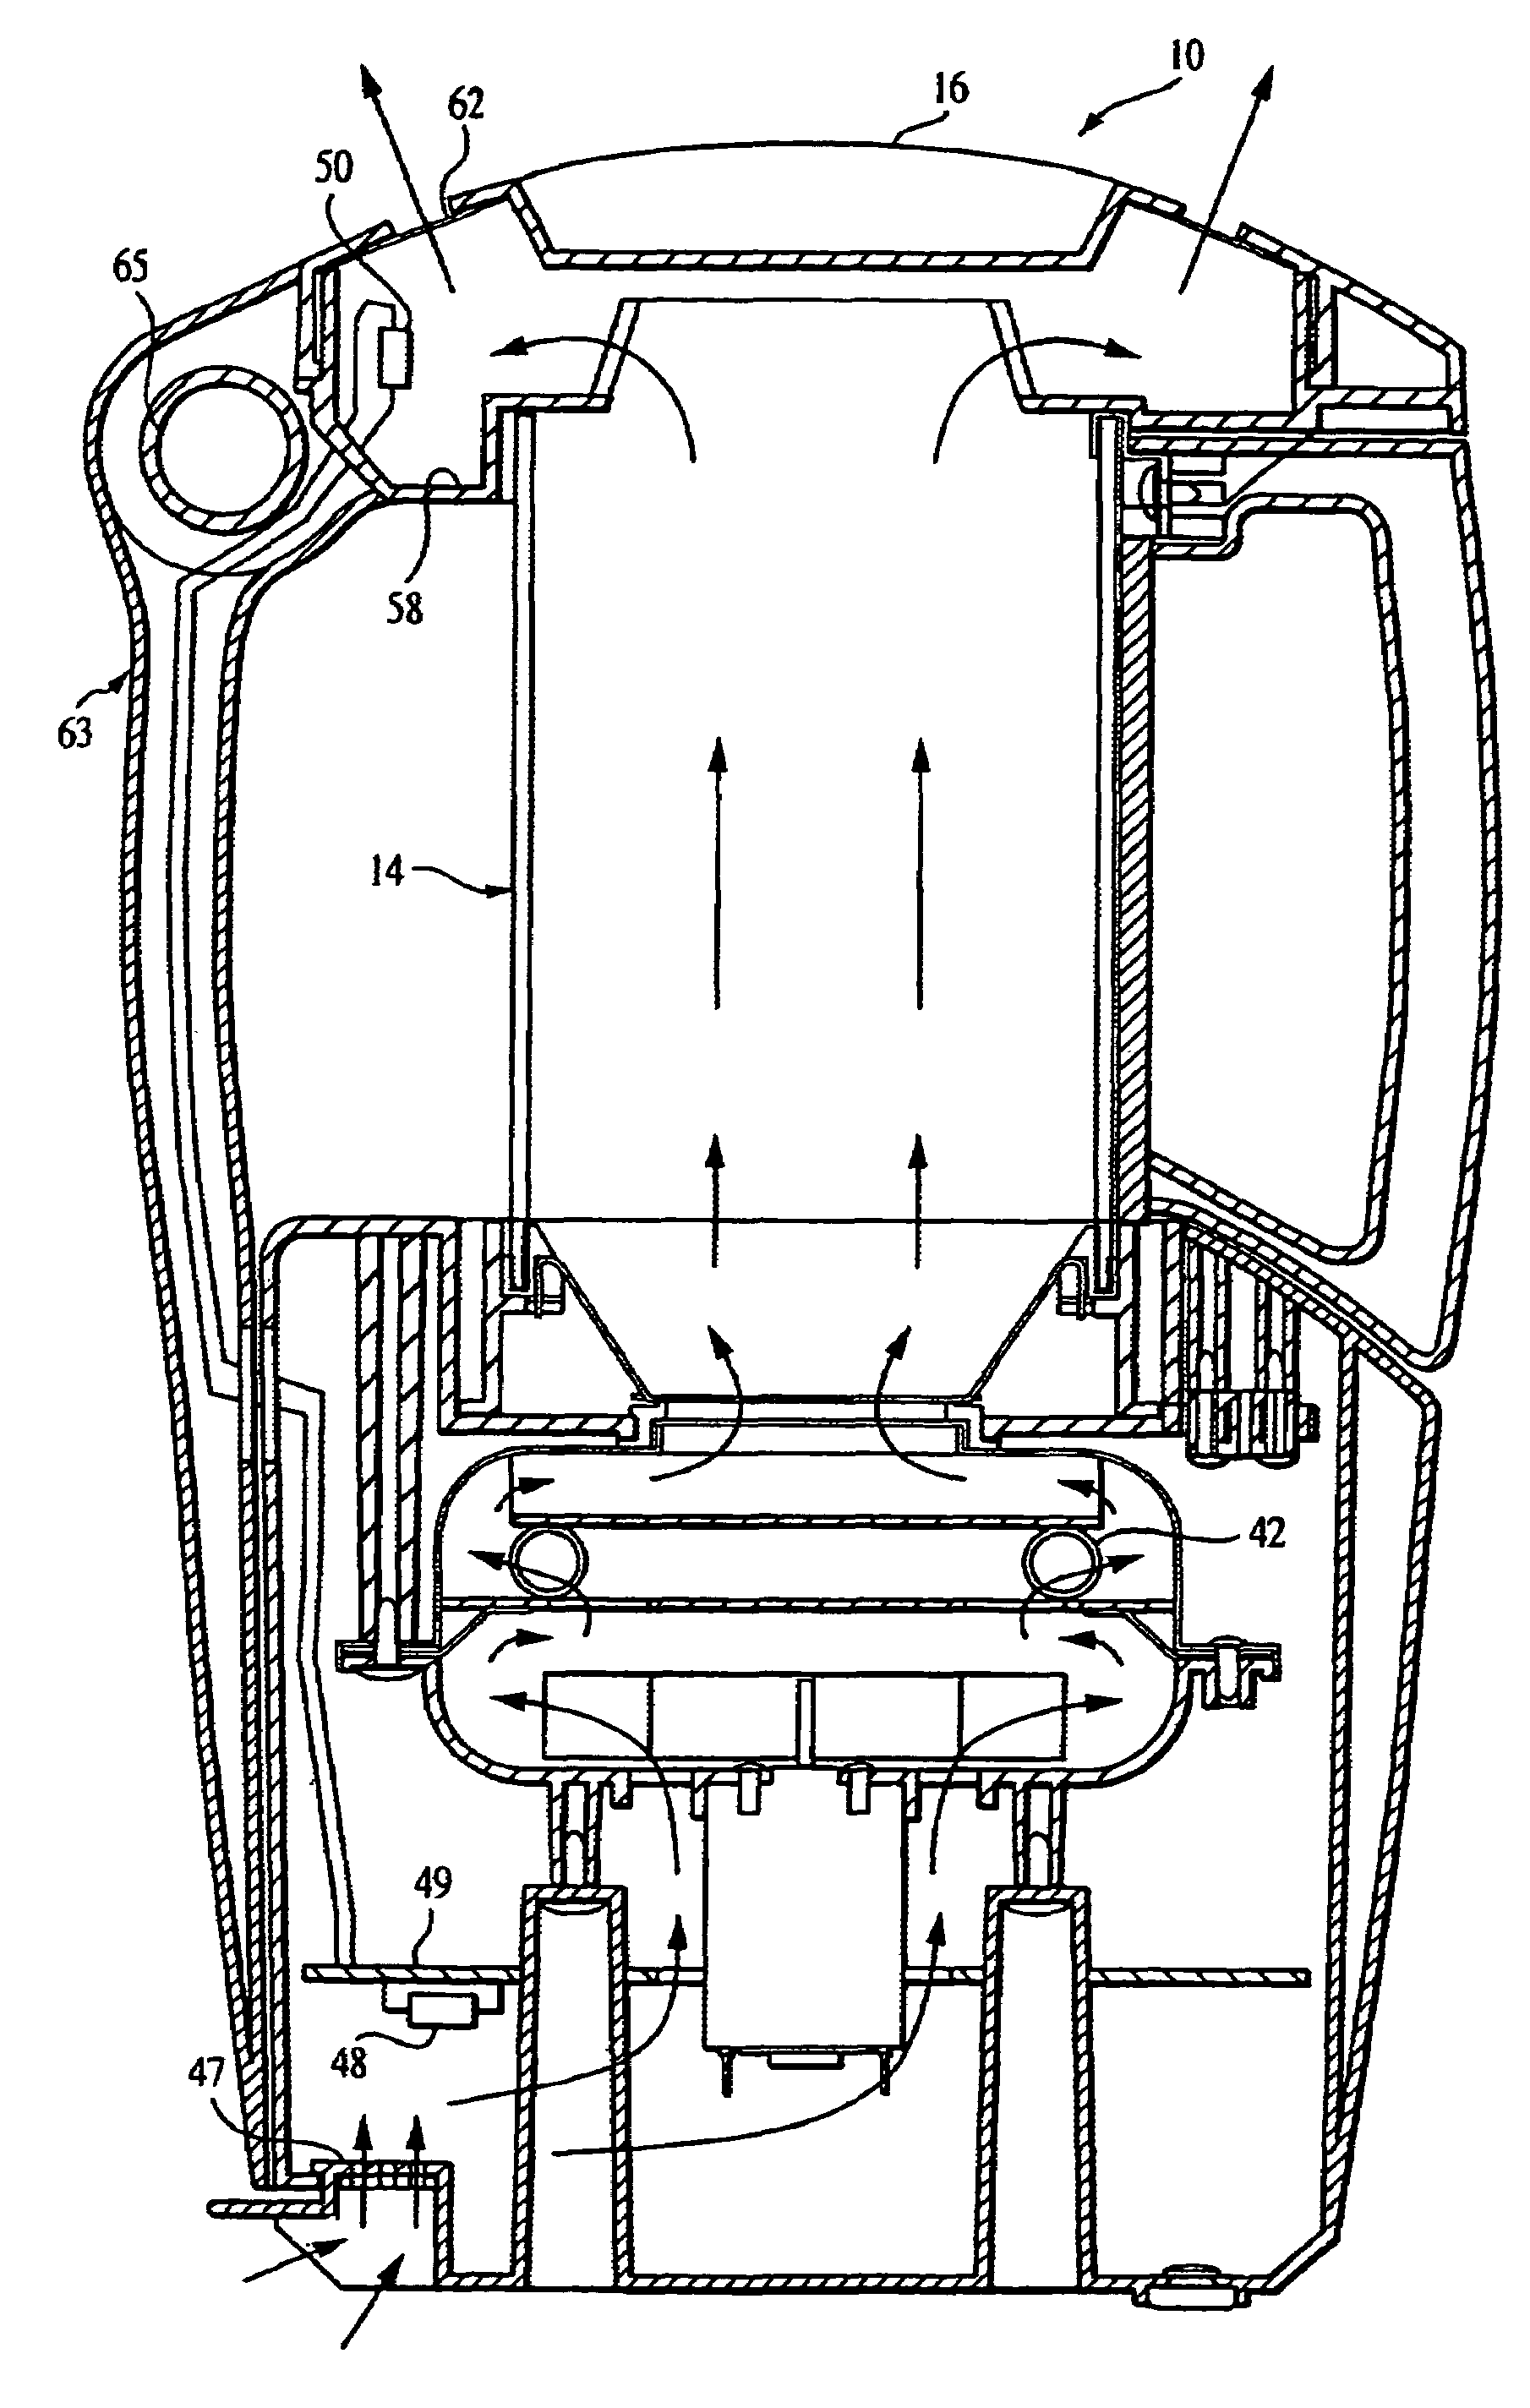 Coffee roaster having an apparatus for increasing airflow in a roasting chamber